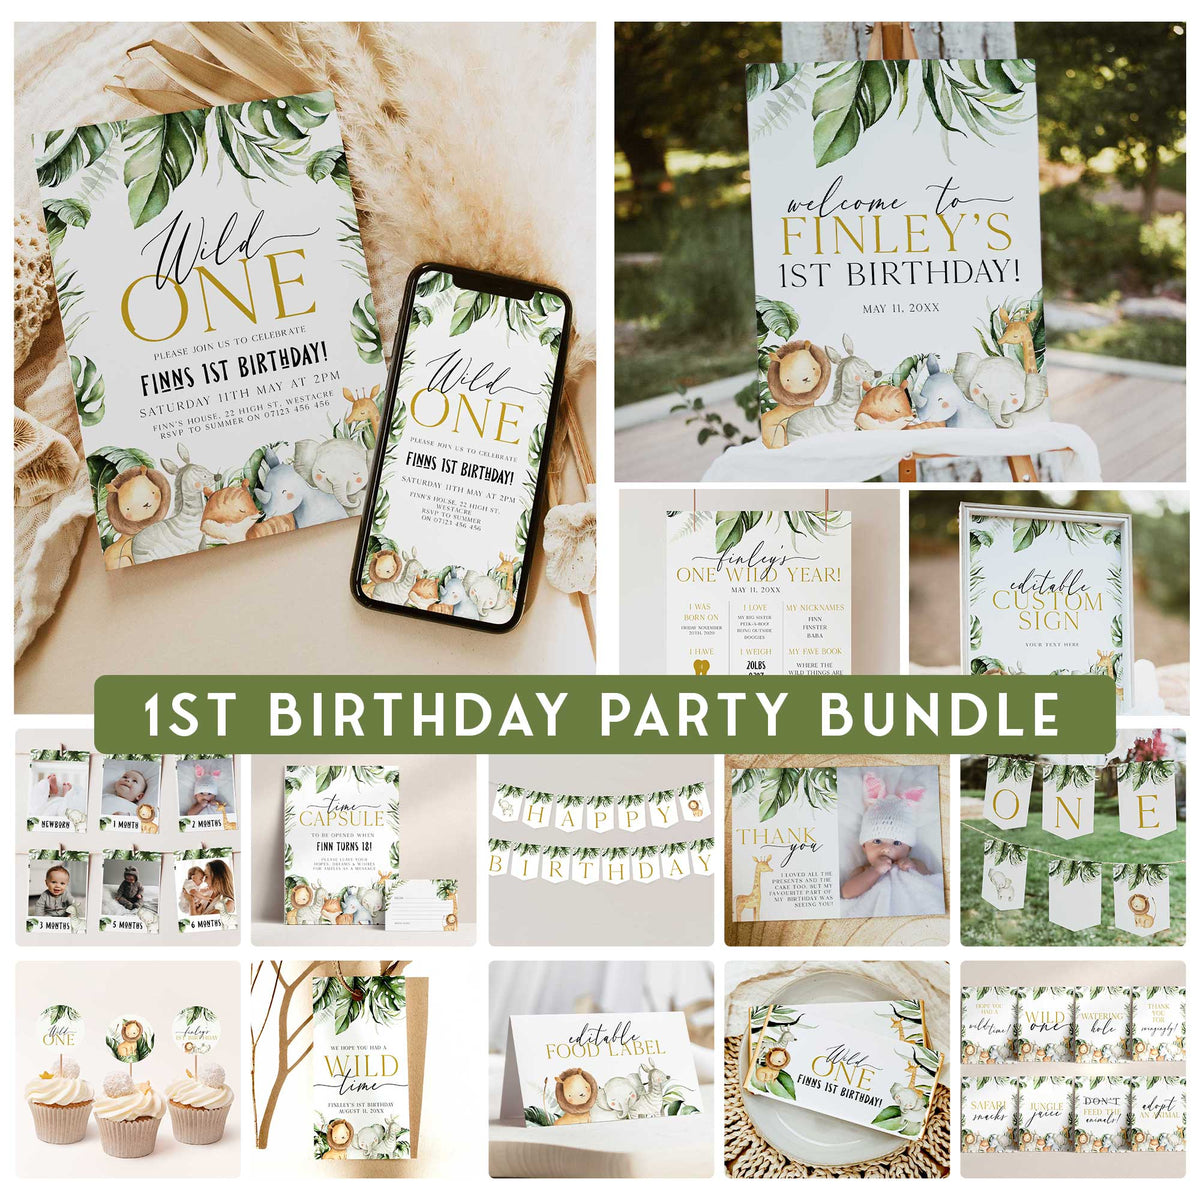 WILD ONE First Birthday Party Bundle – OhHappyPrintables